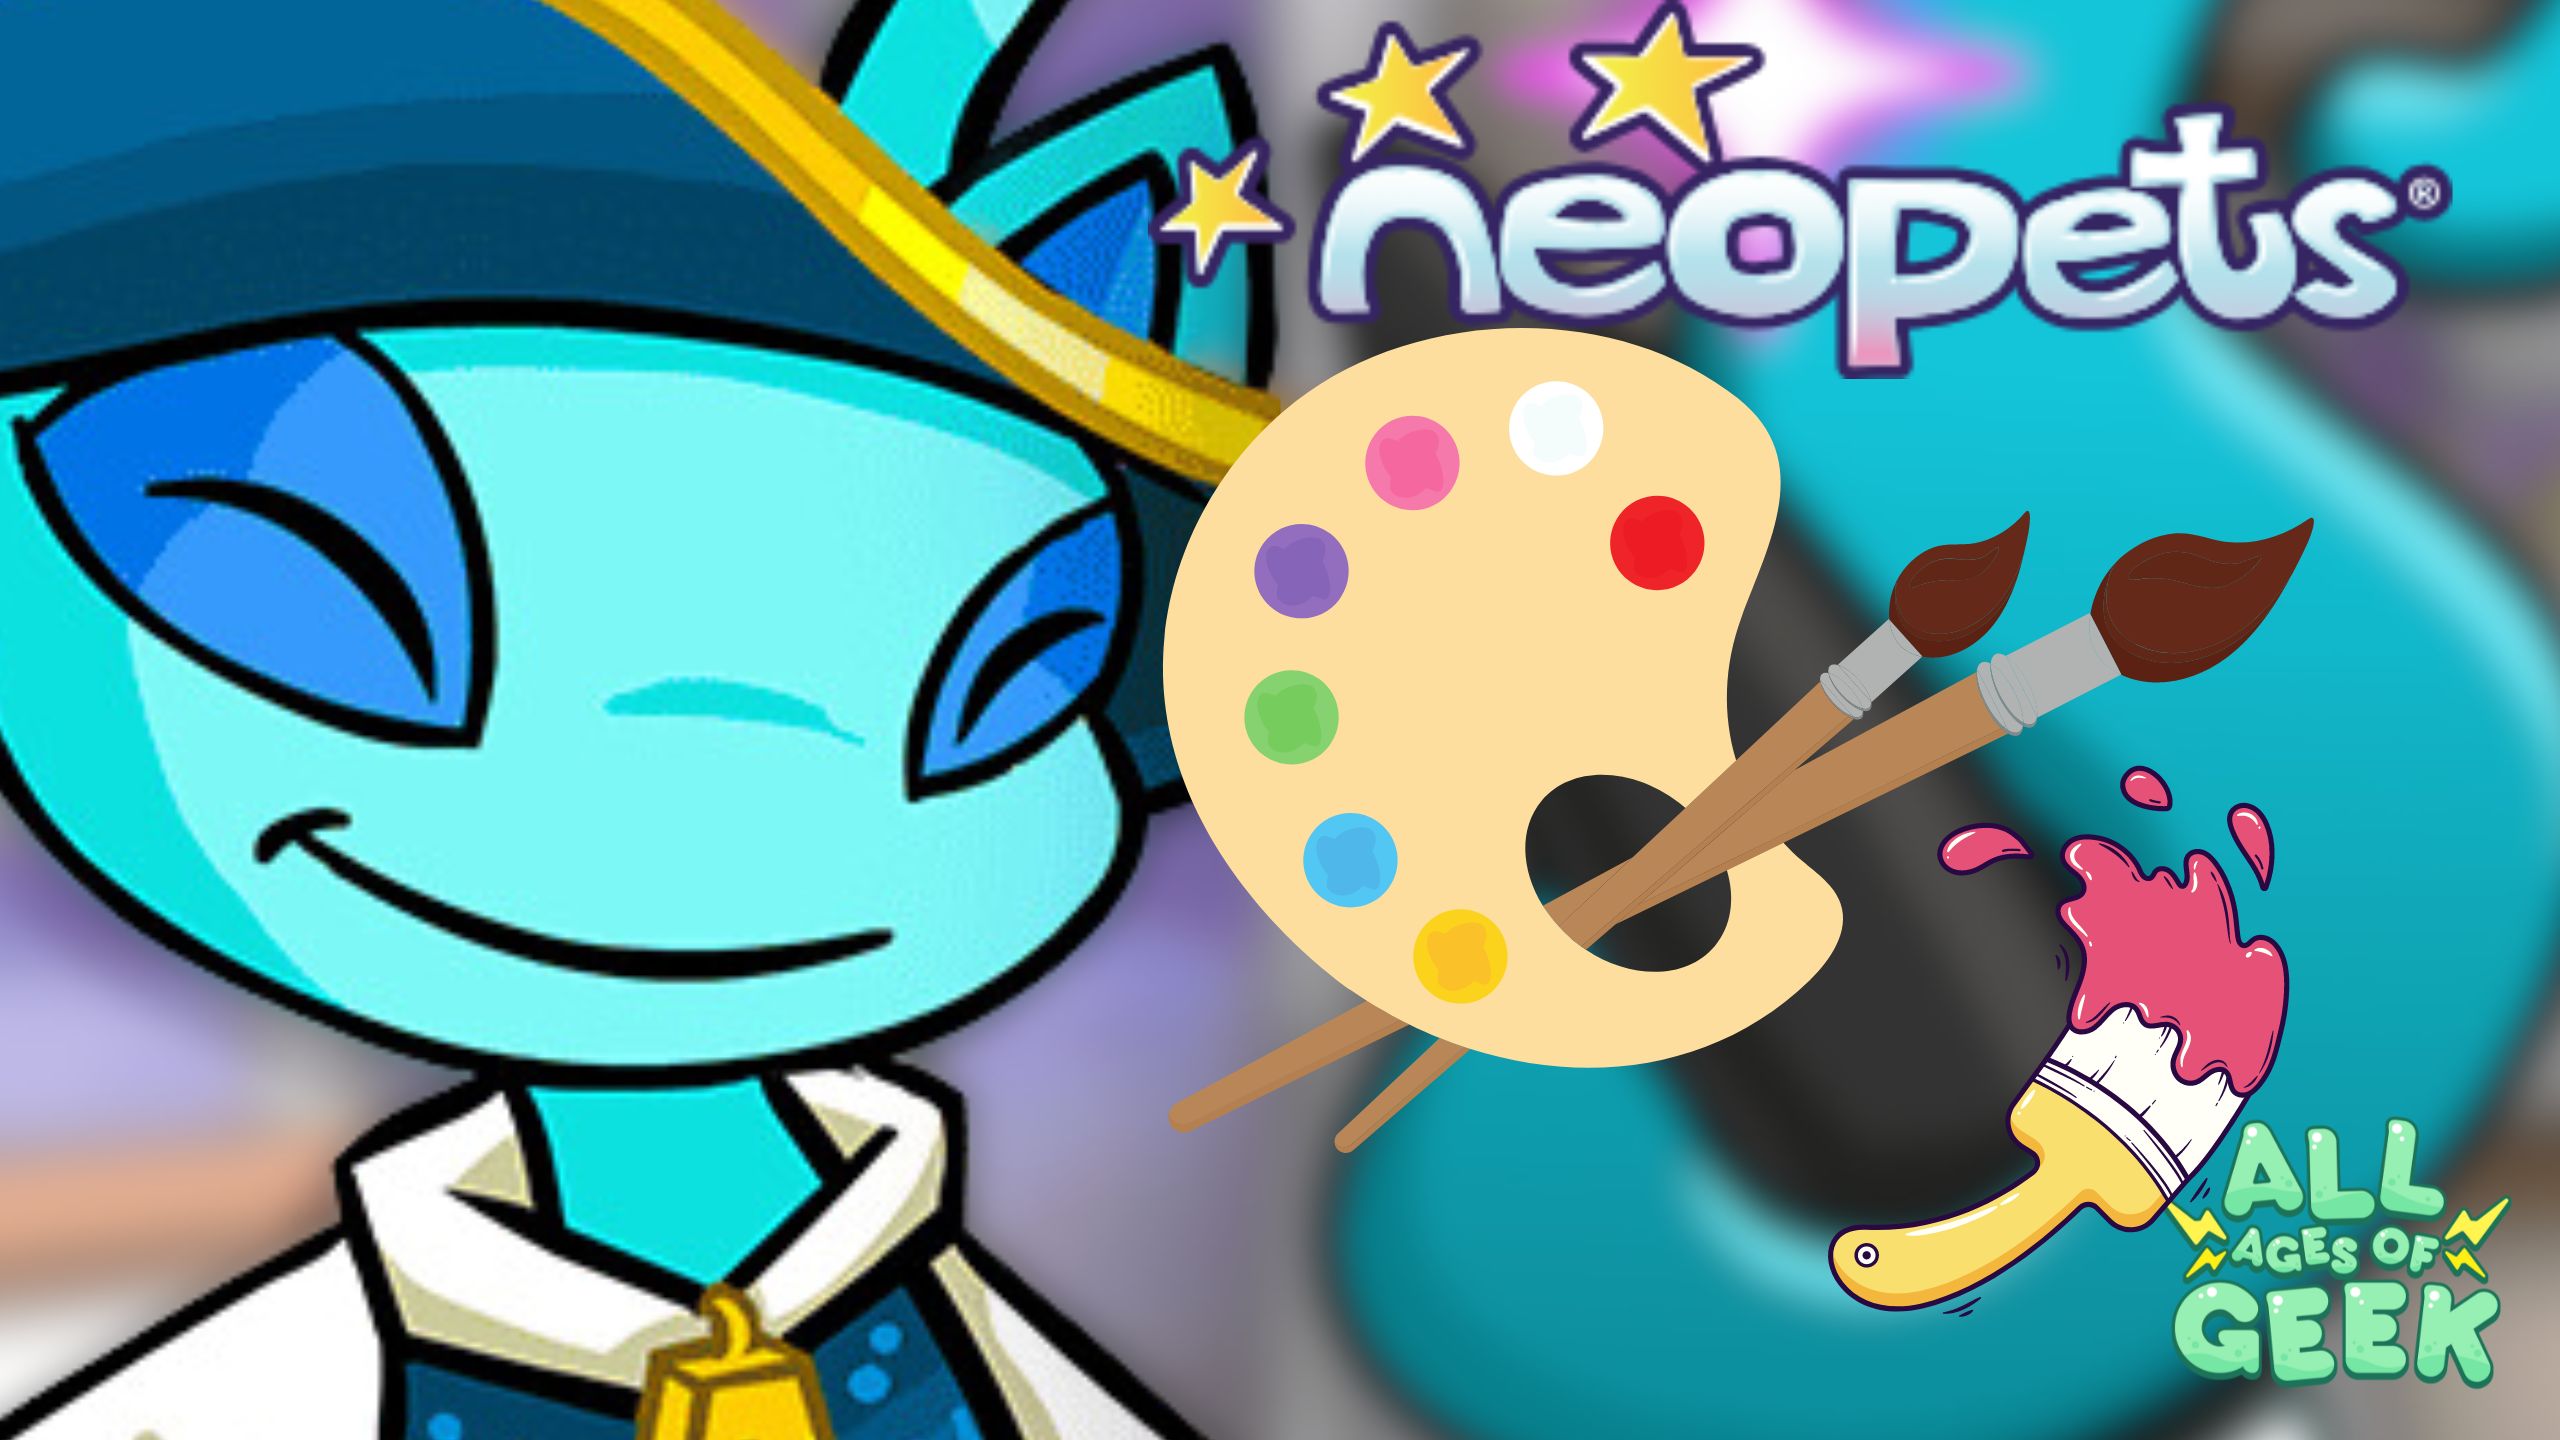 A cheerful blue Neopet character is smiling on the left side of the image. The Neopets logo is prominently displayed in the top right corner. A colorful artist's palette with paintbrushes is in the center, and the "All Ages of Geek" logo with a paintbrush dripping pink paint is in the bottom right corner.